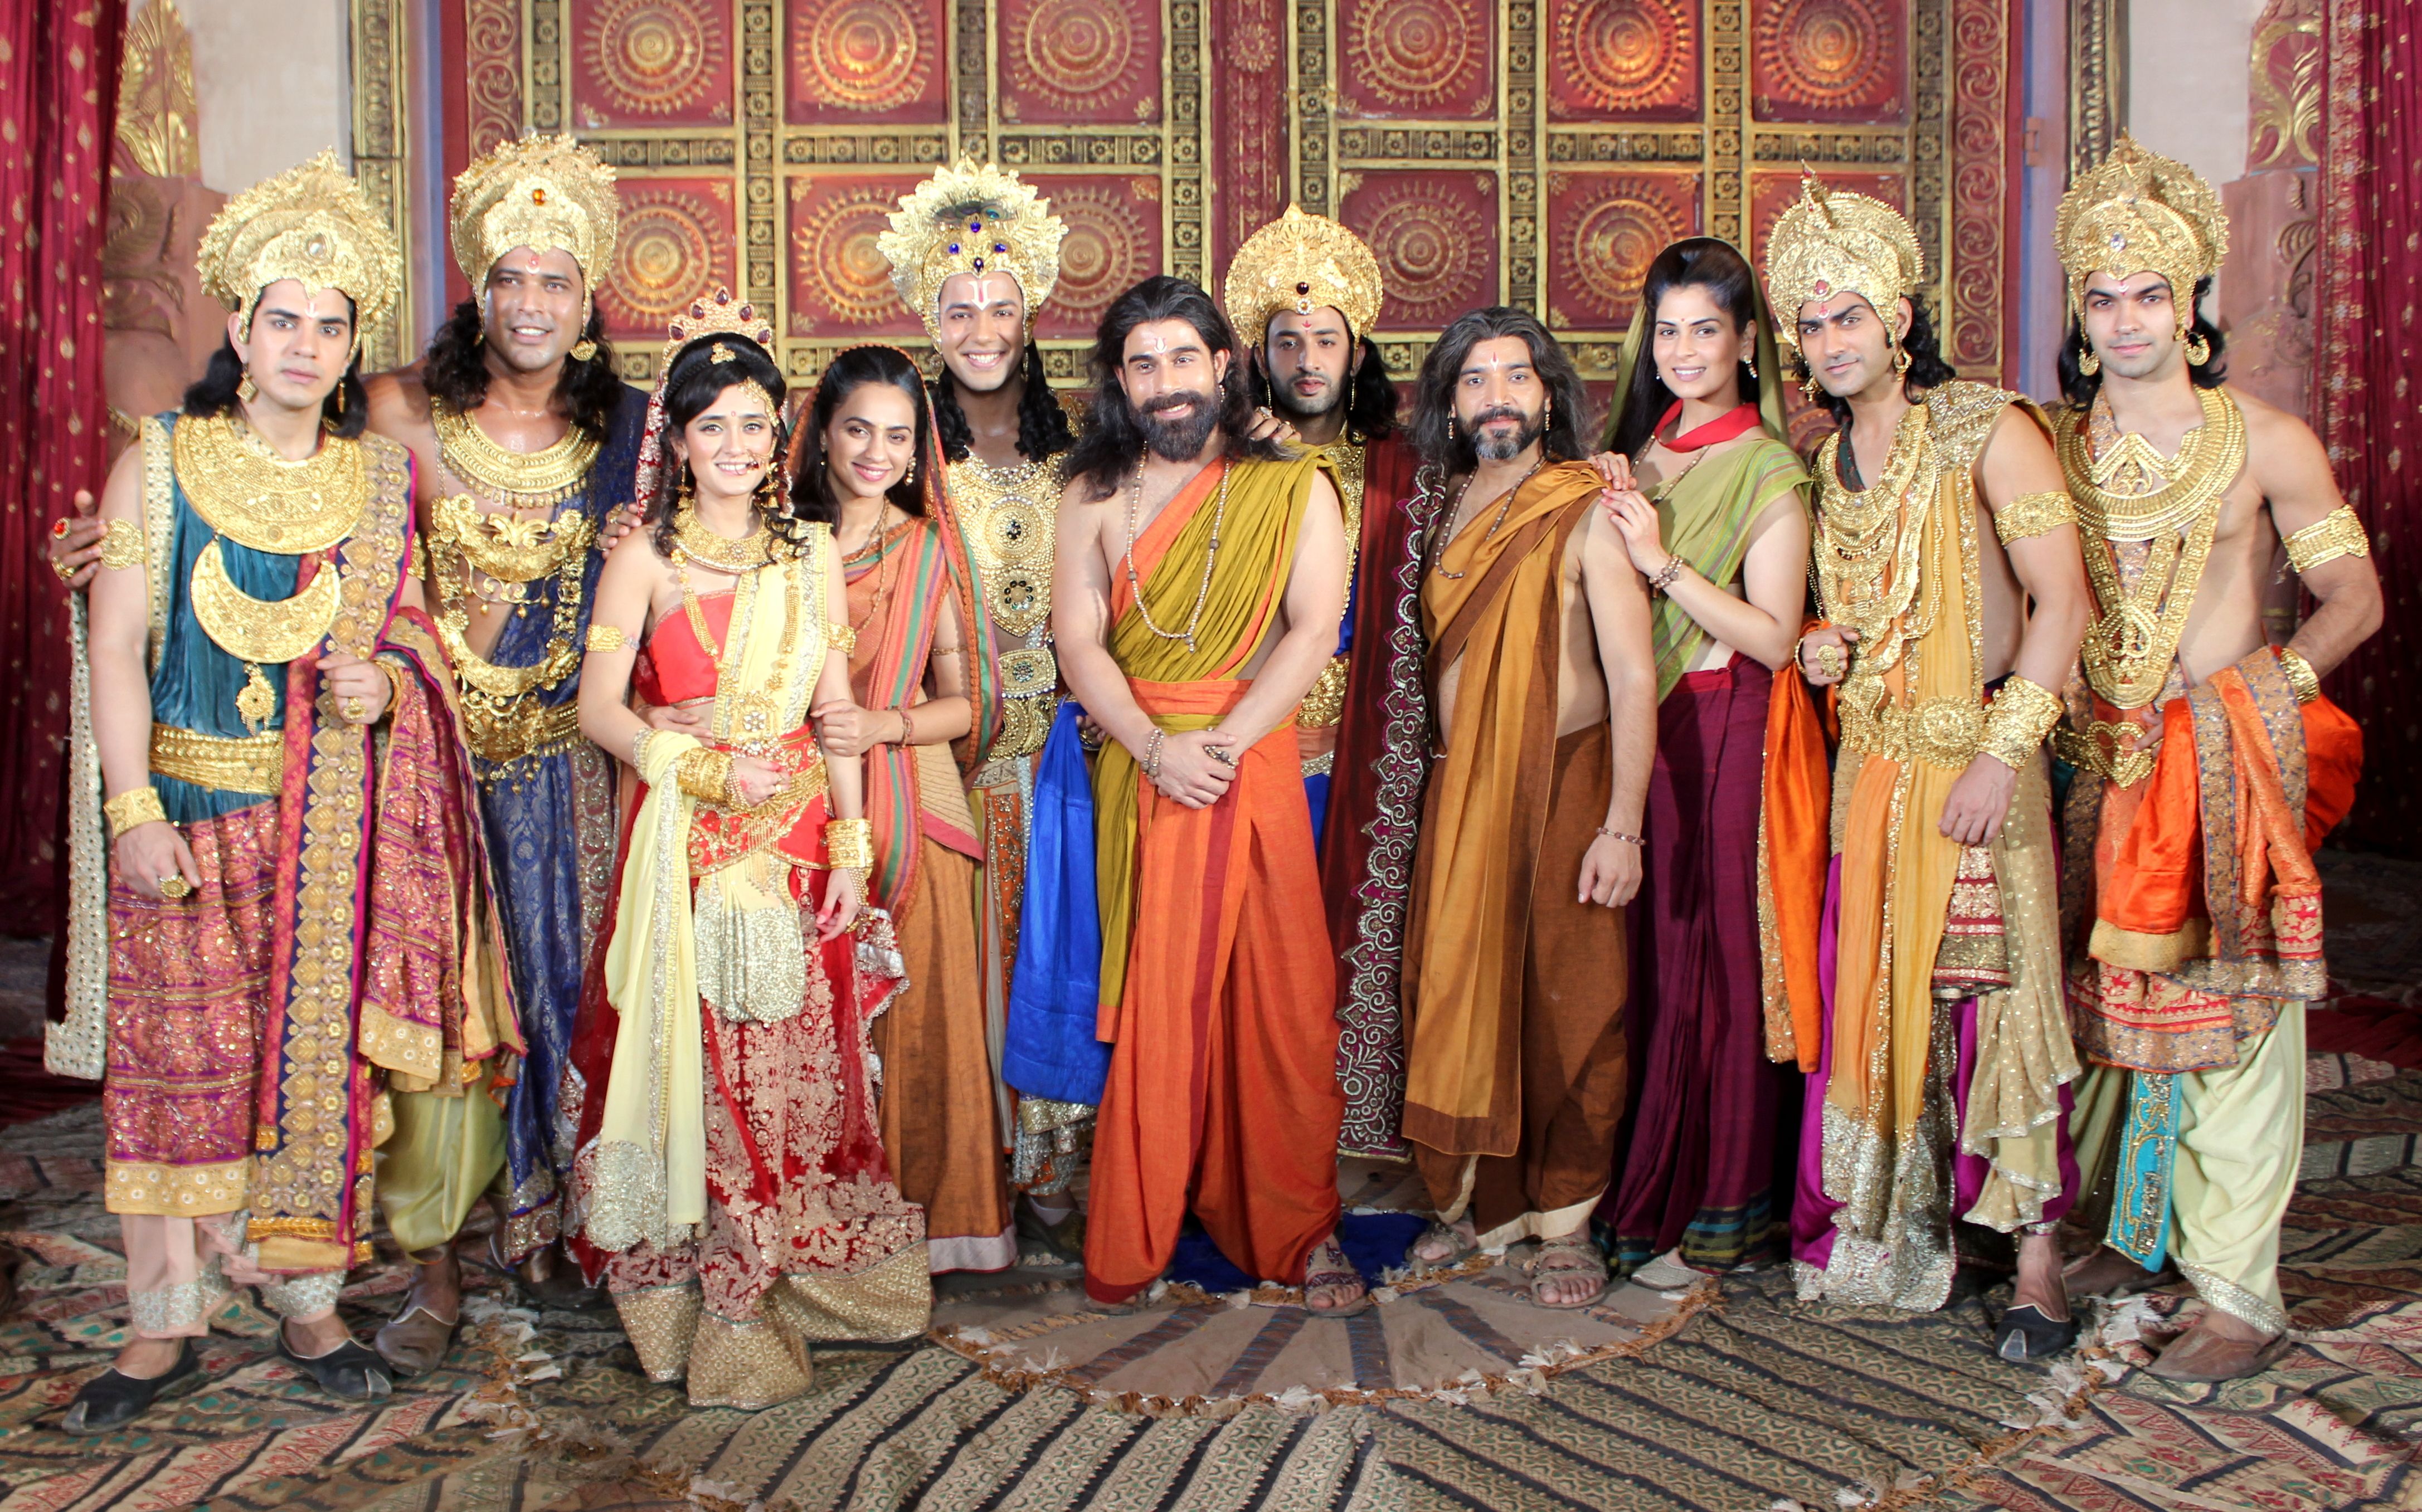 Sony TV's Suryaputra Karn to focus on Lord Krishna's 'heavenly ascend'